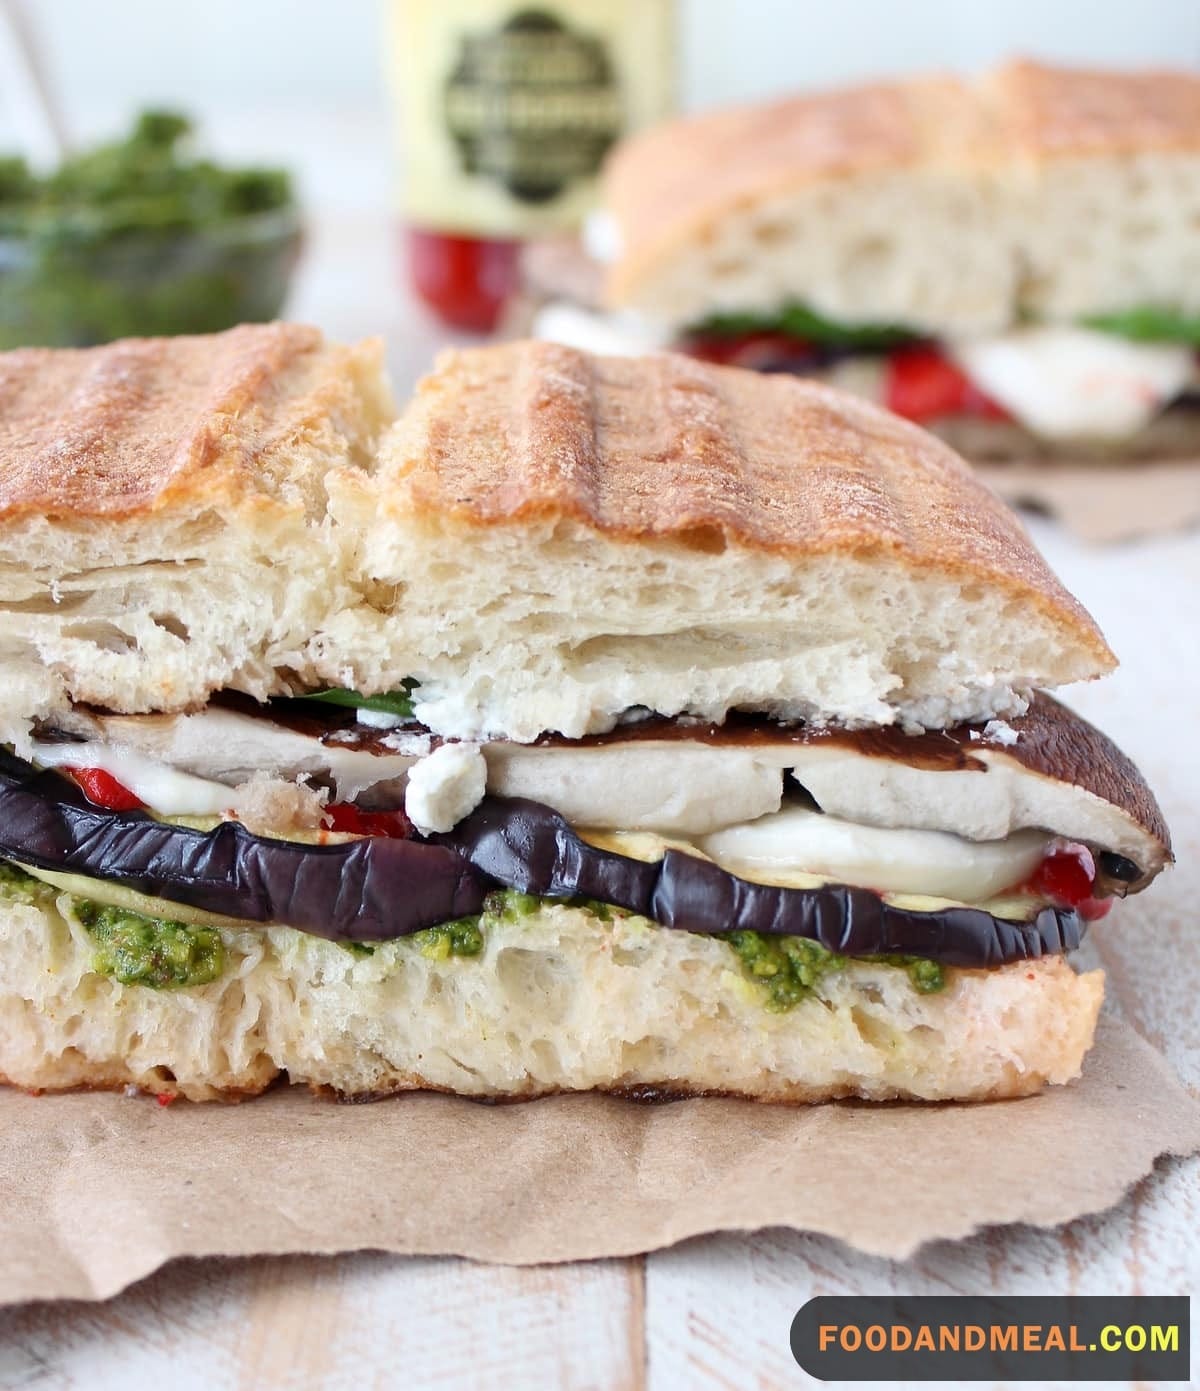 Grilled Panini With Vegetables